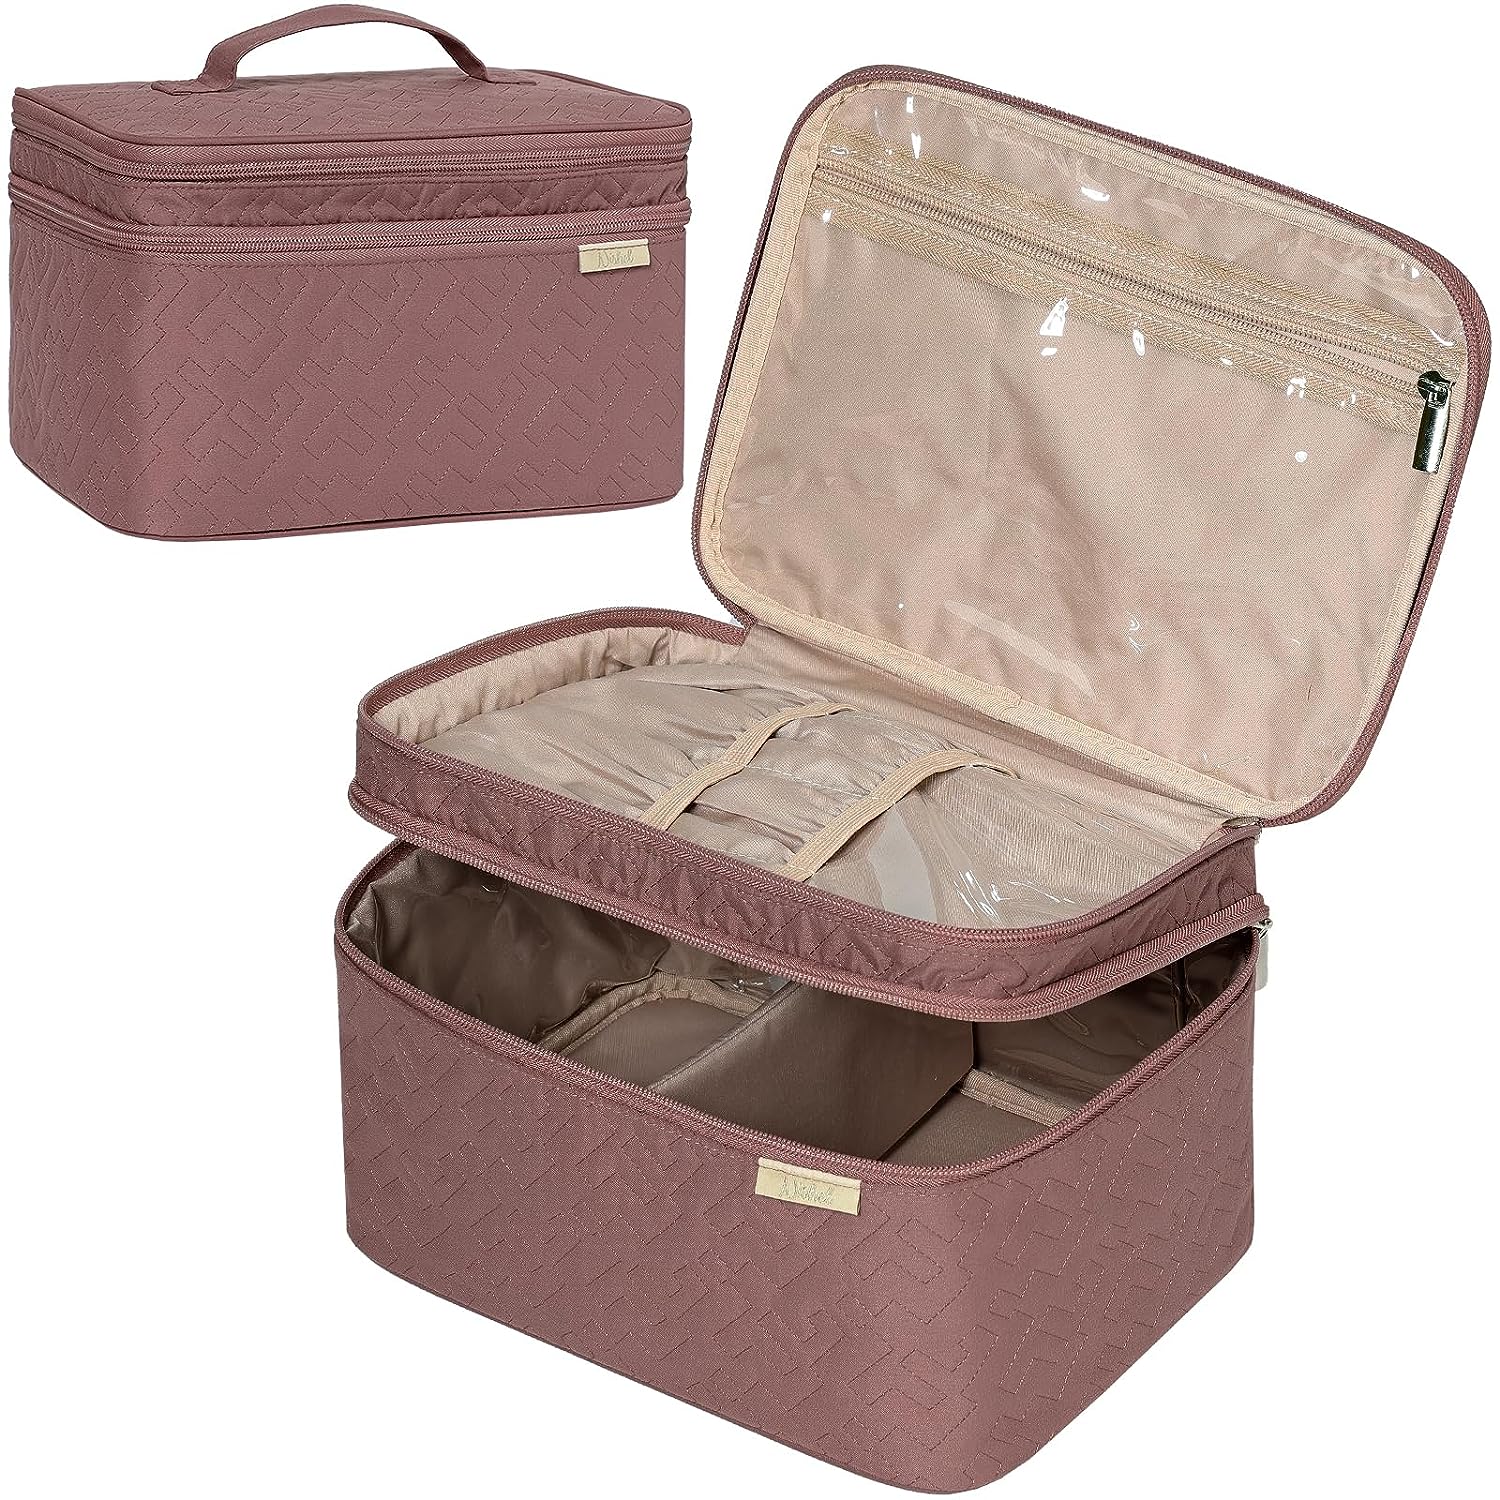 Blushbees® Double Layer Travel Makeup Bag - Rose-Wood Pink